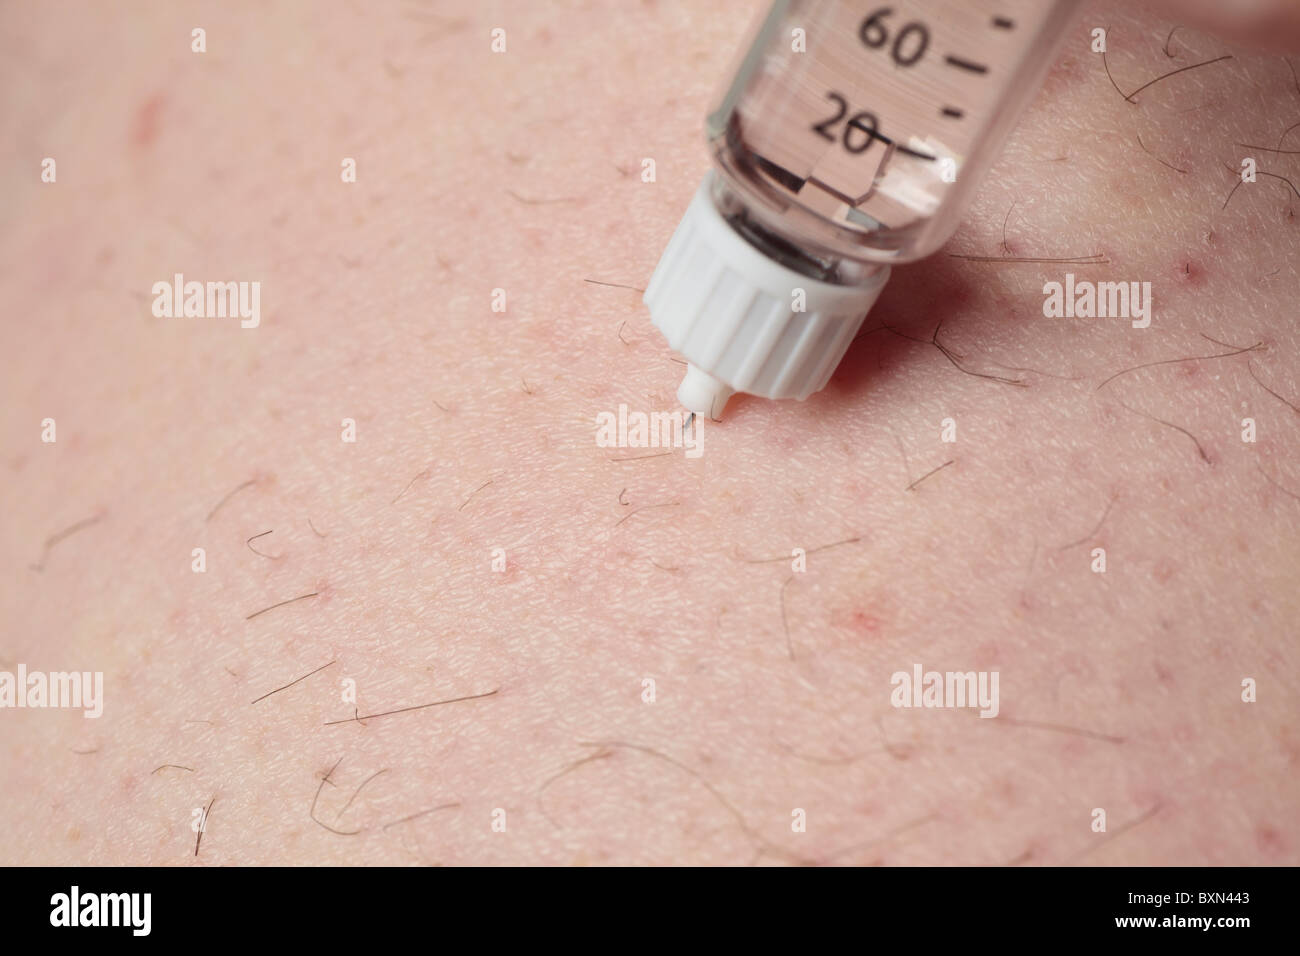 Insulin injection. Stock Photo